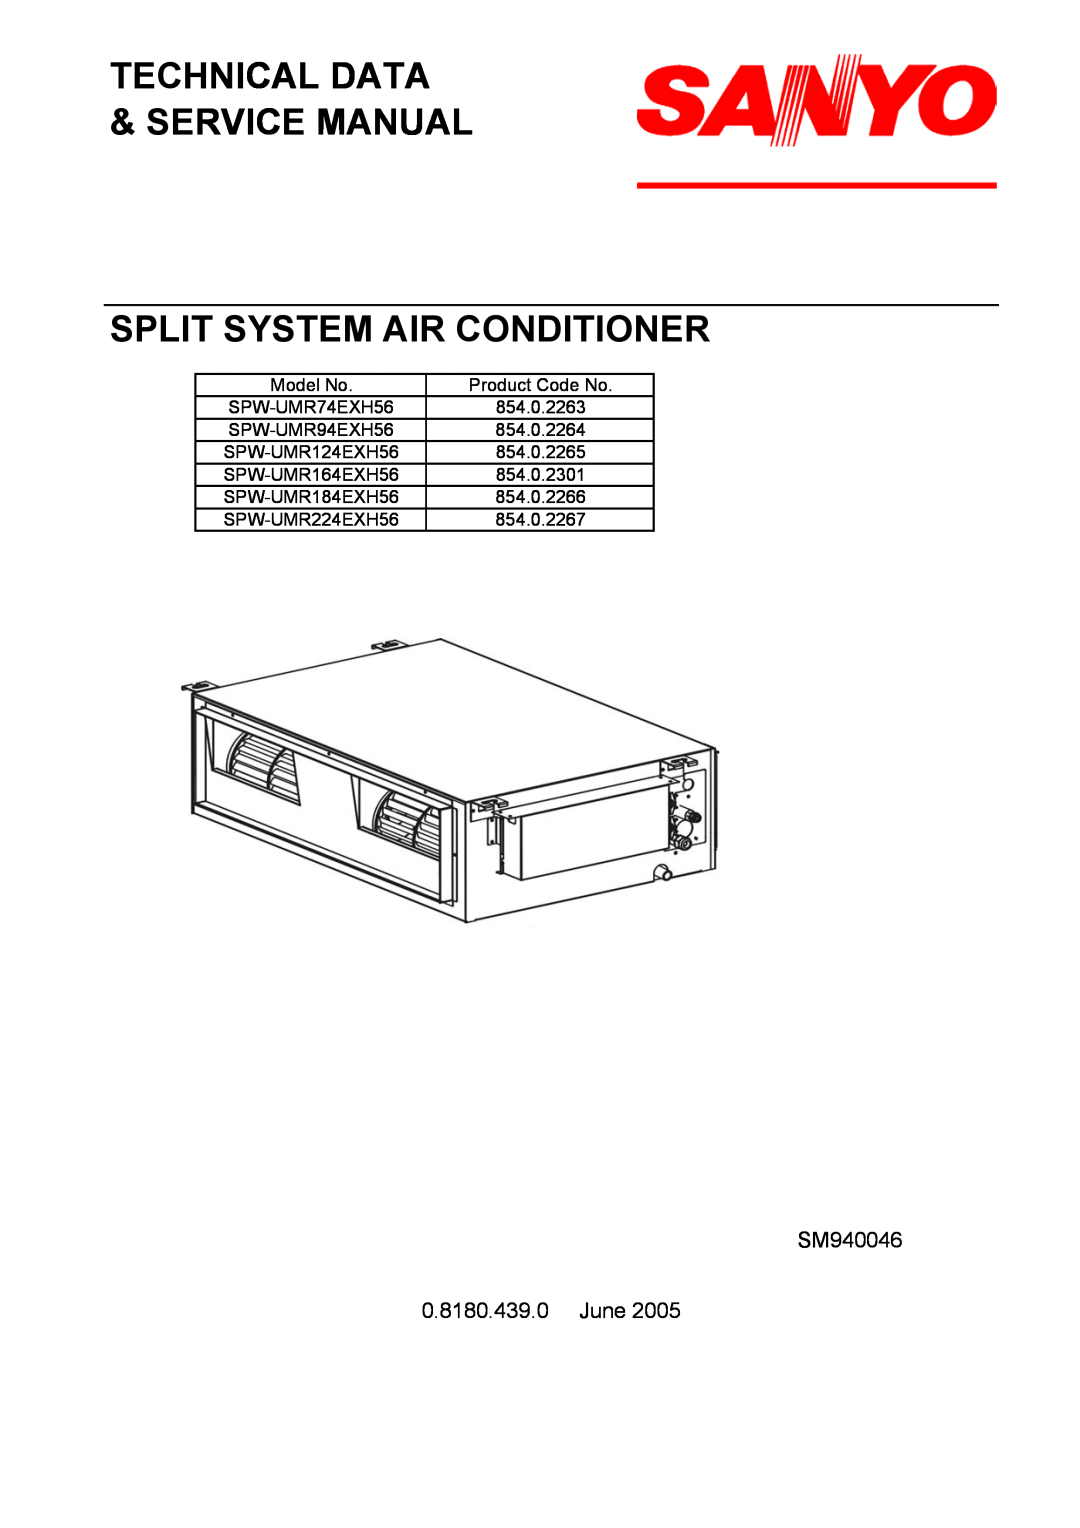 Sanyo SPW-UMR124EXH56 operation manual for Refrigerant R410A, R410A Models Indoor Units, ECO-iSystem Air Conditioner 